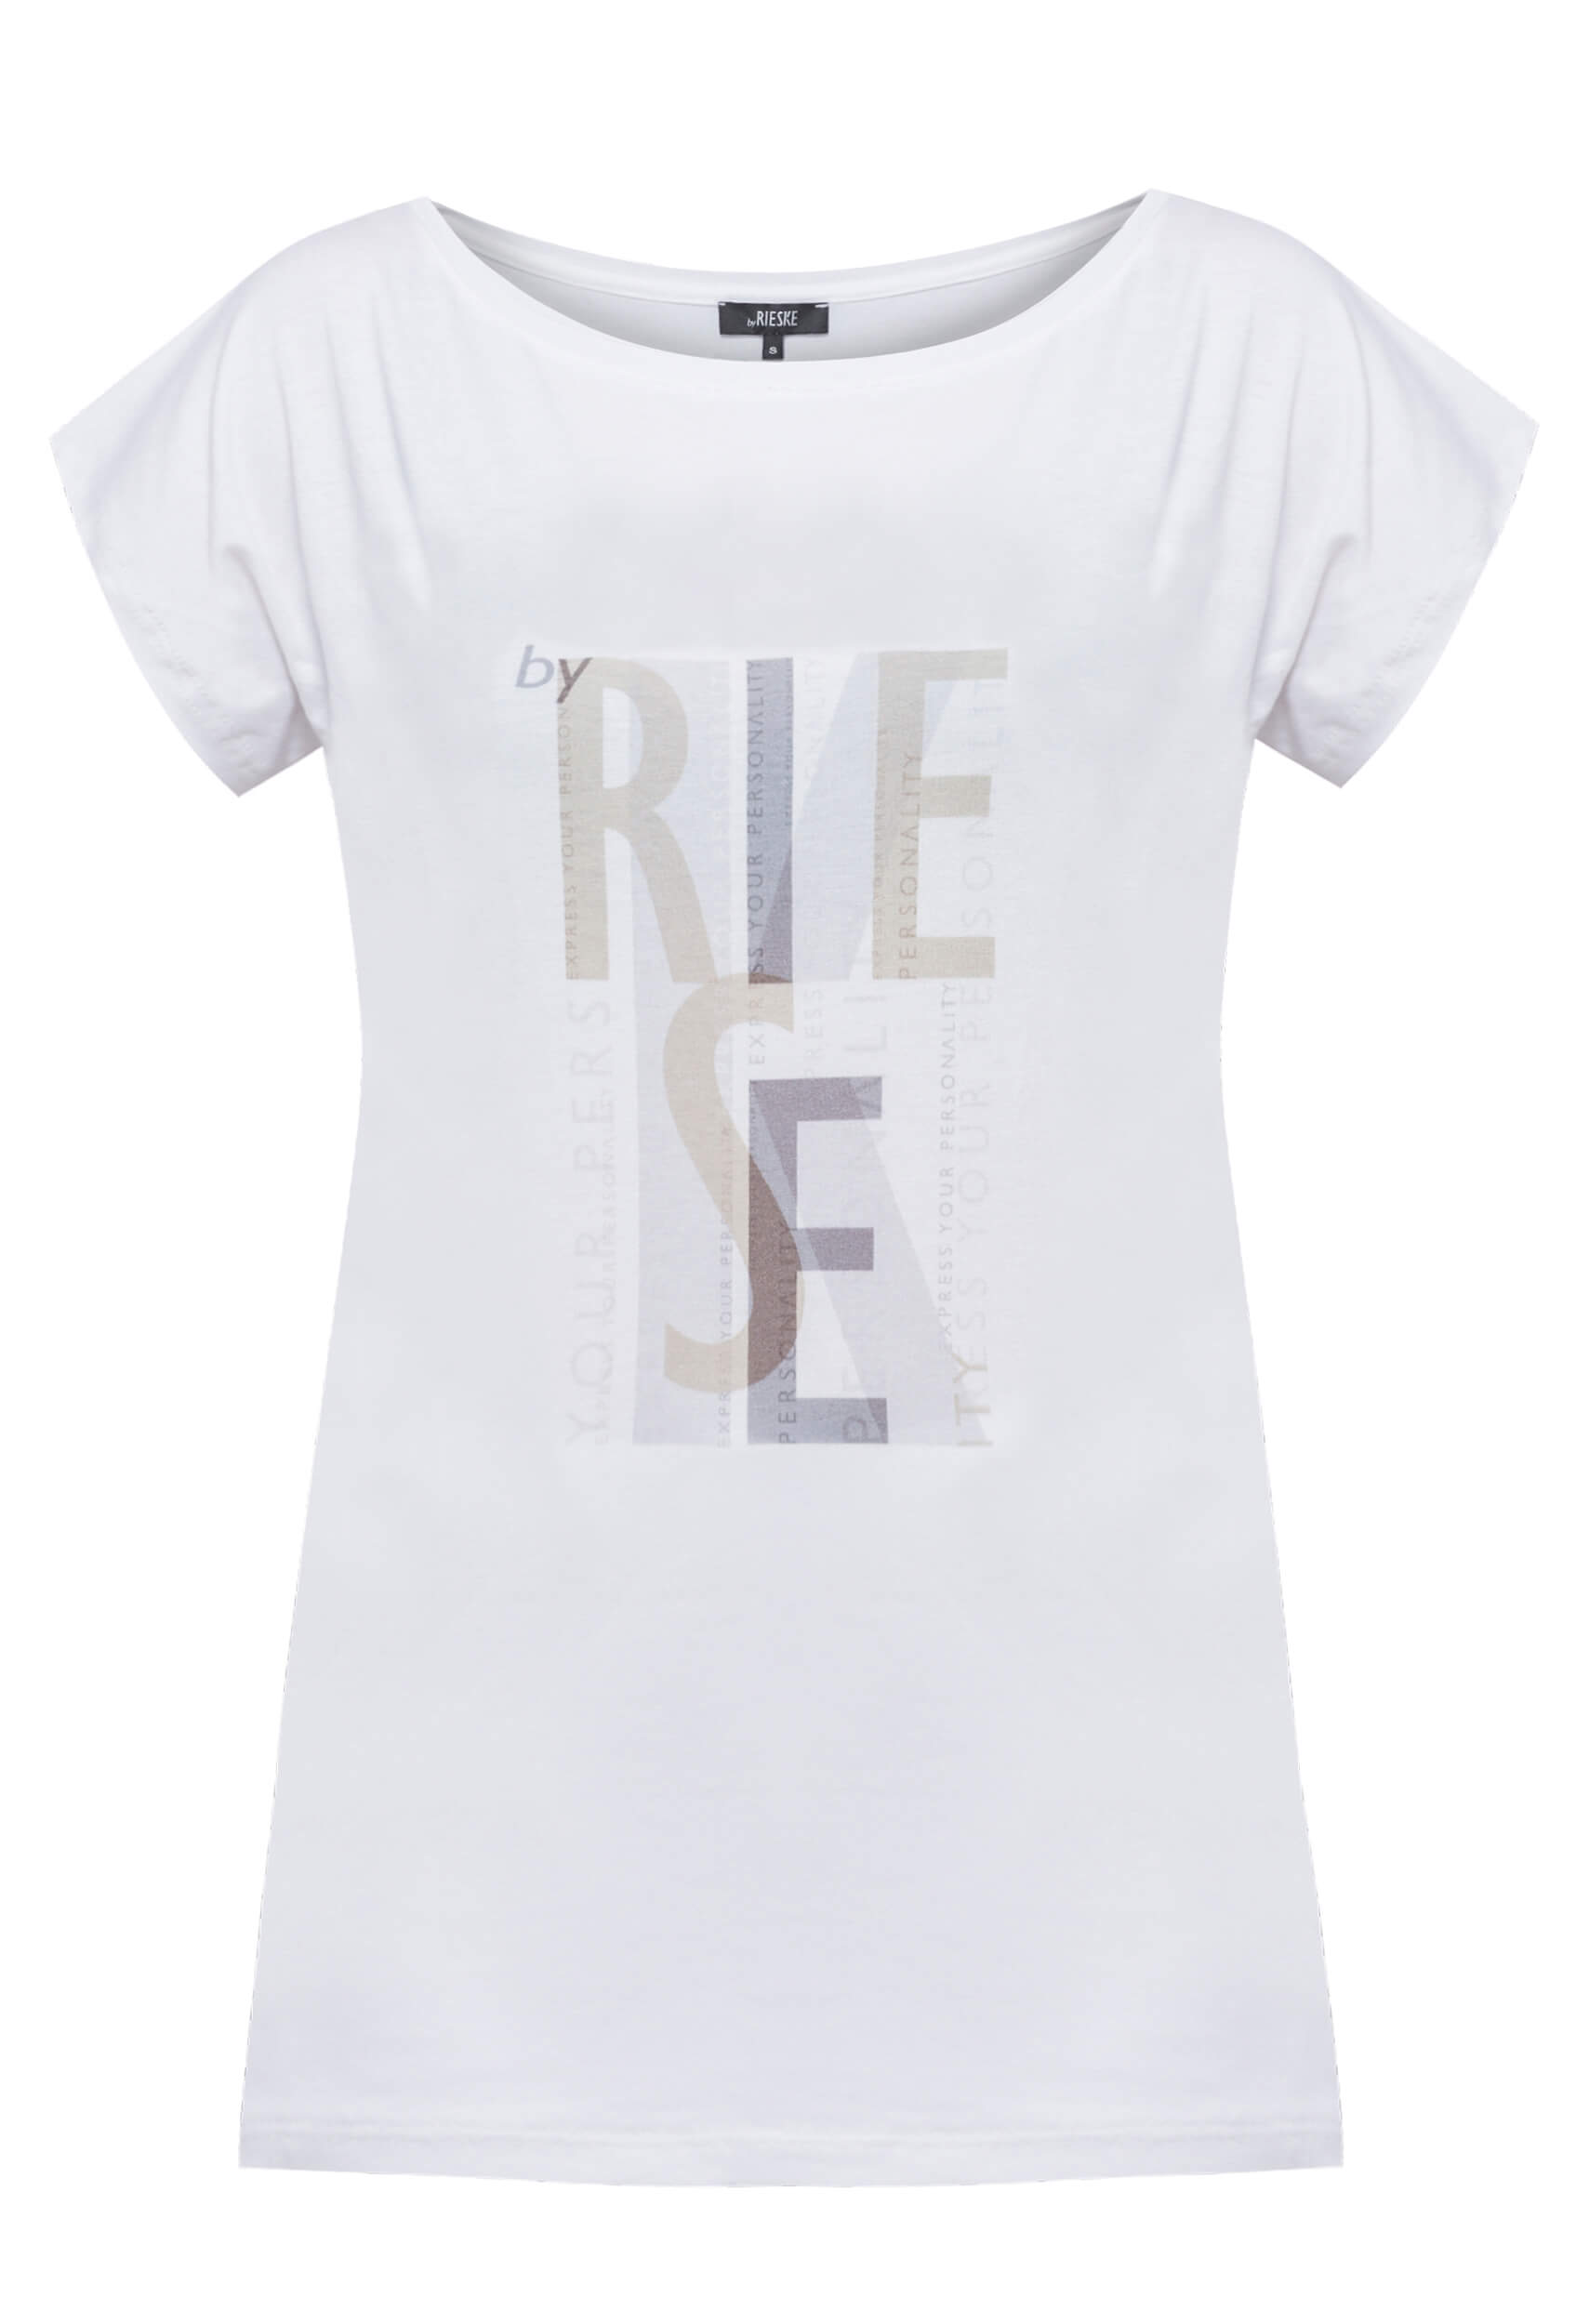 119019 FRONT PRINTED TOP WHITE - By Rieske image 3